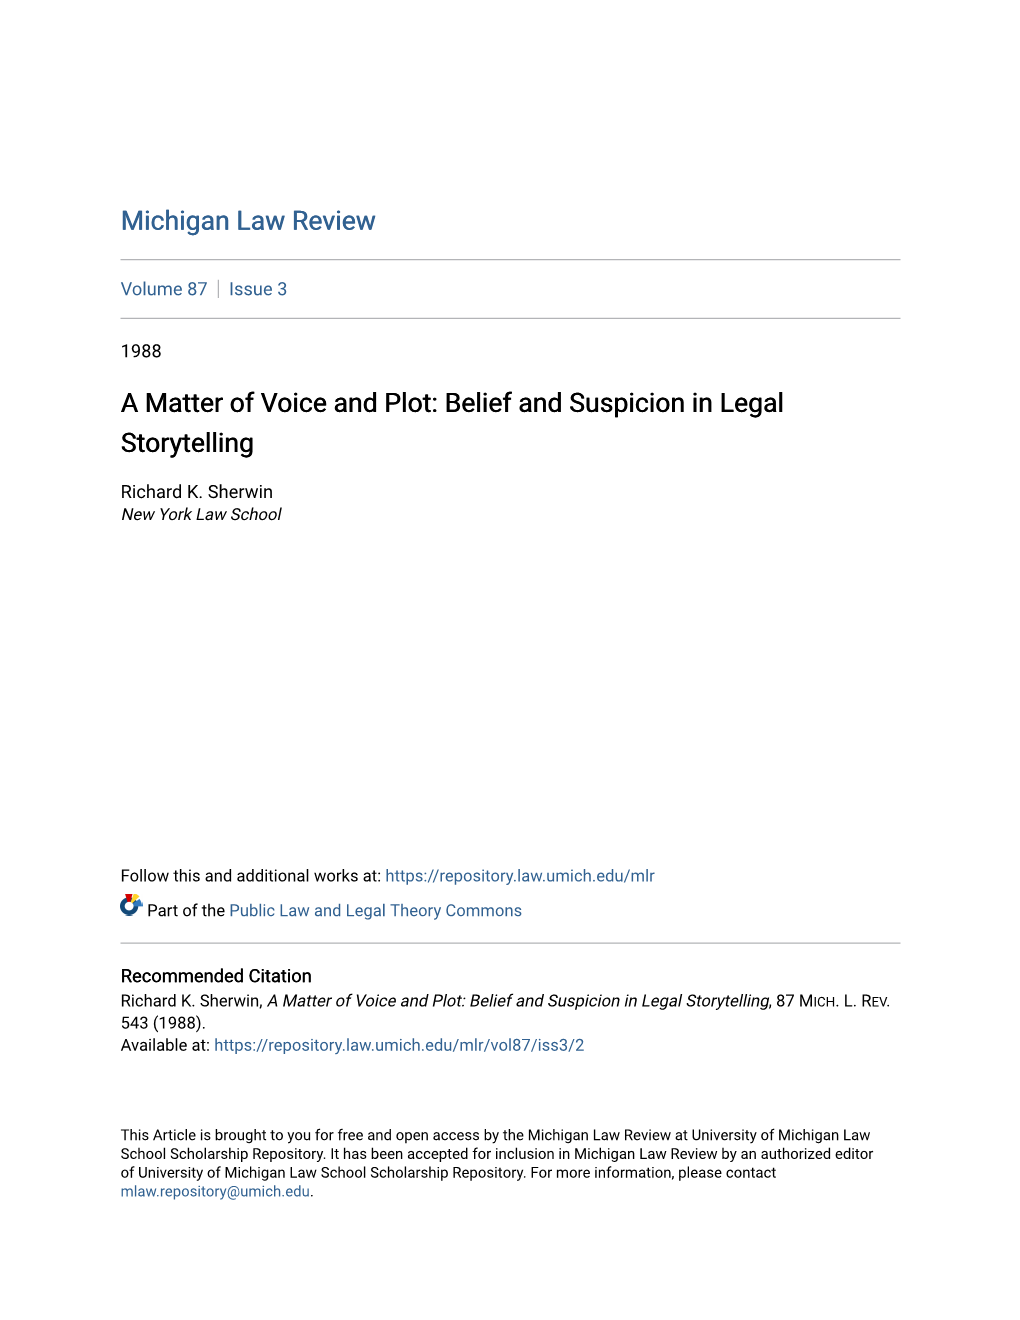 A Matter of Voice and Plot: Belief and Suspicion in Legal Storytelling